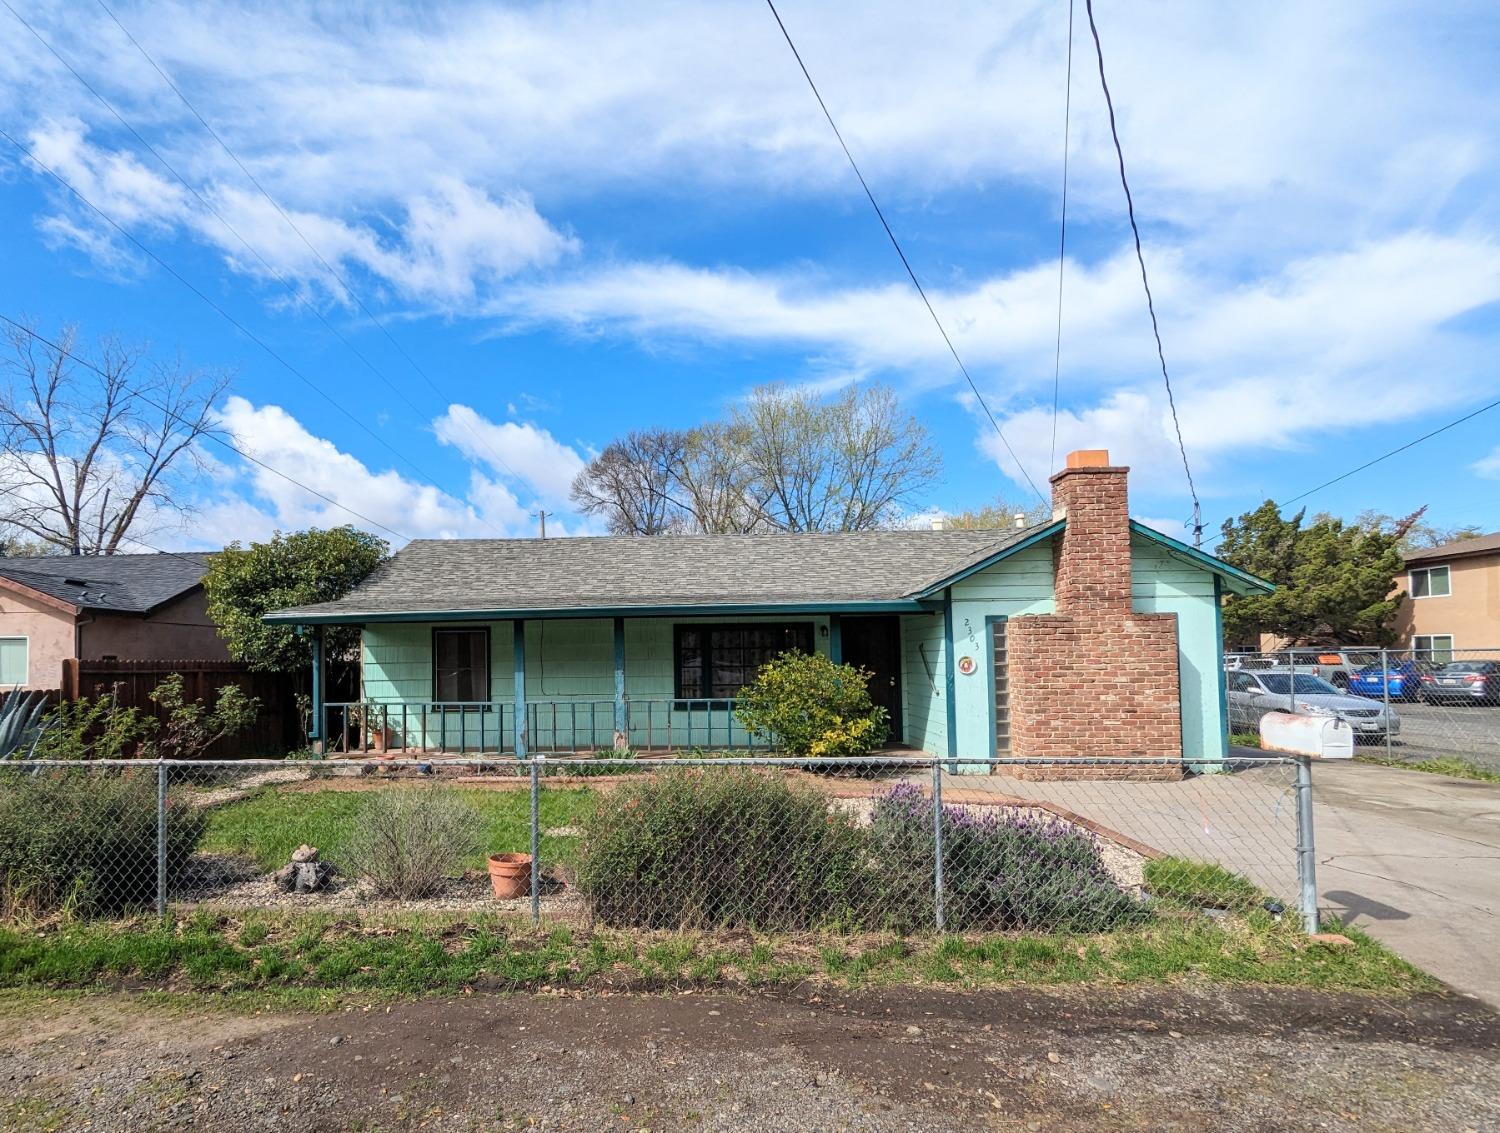 Photo of 2303 Floral Ave in Chico, CA